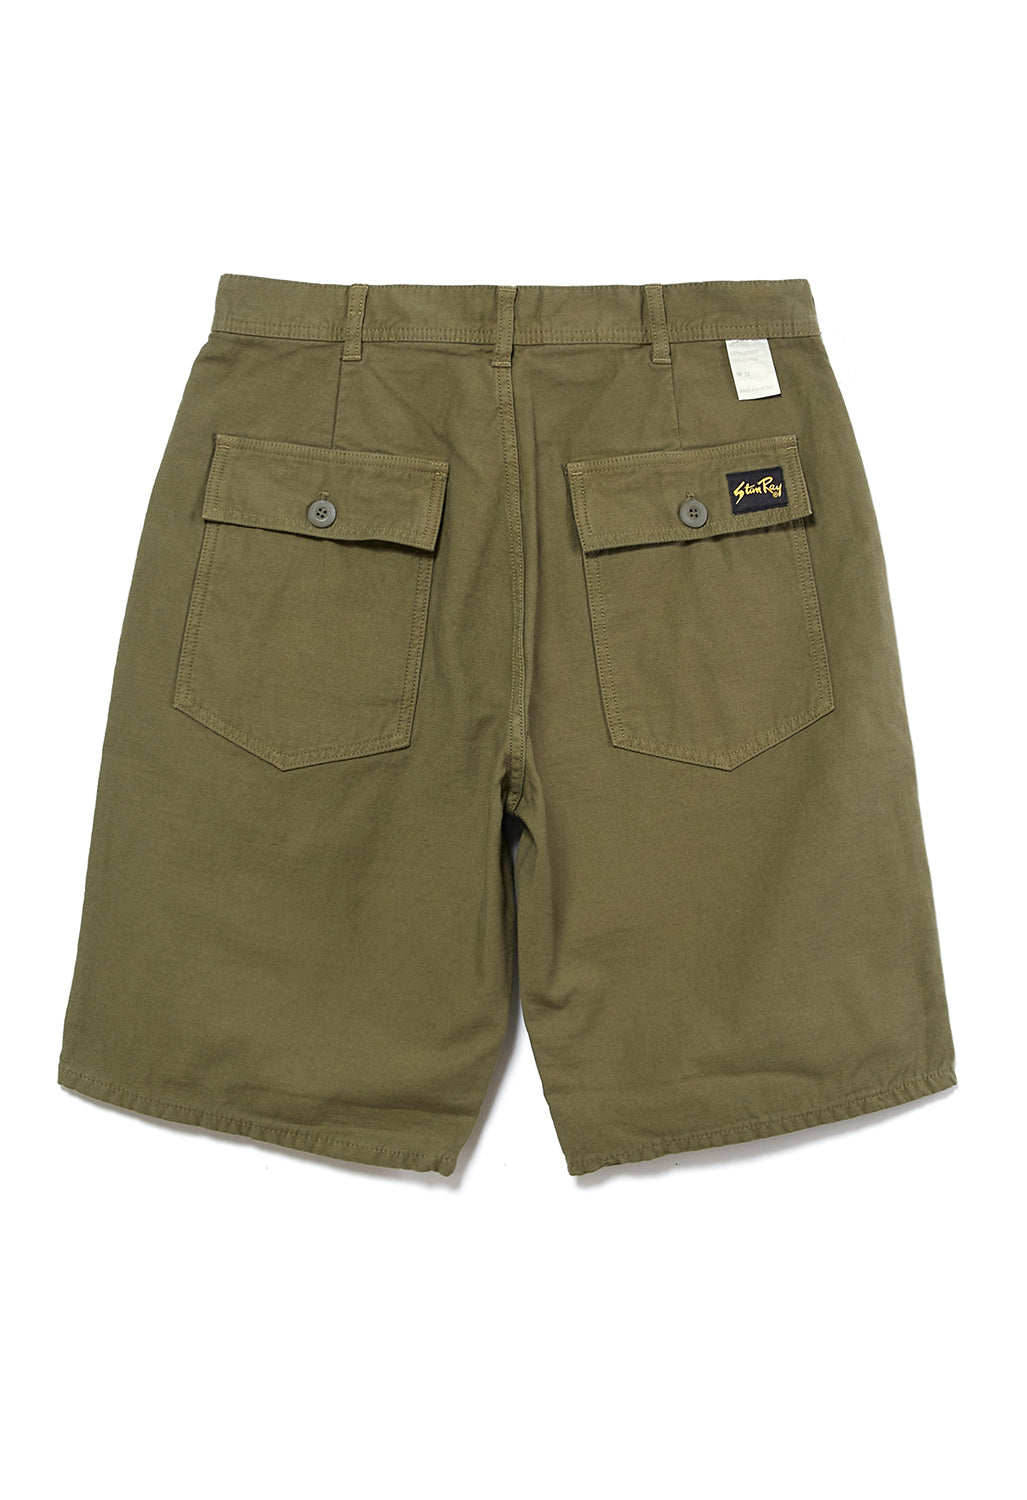 Stan Ray Fat Men's Shorts - Olive